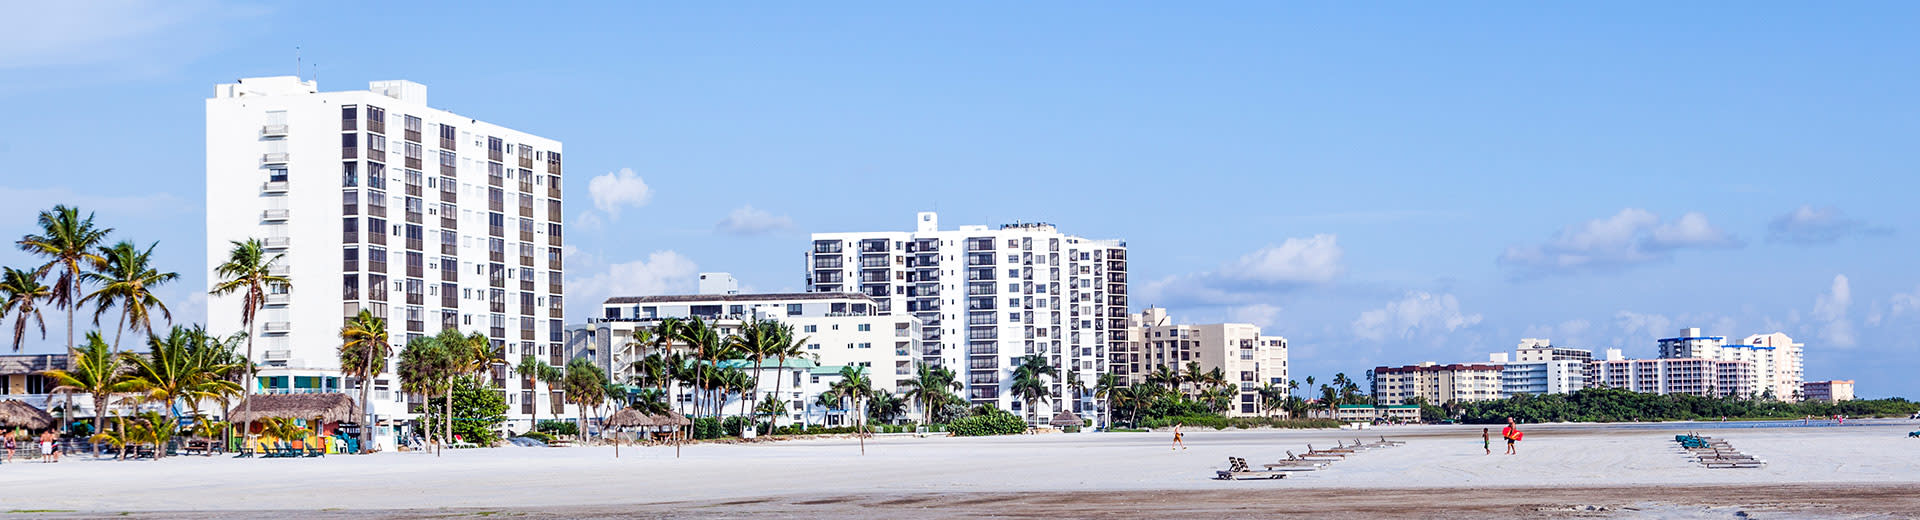 High rise hotels overlook a beach in Fort Myers on a beautiful summer's day.